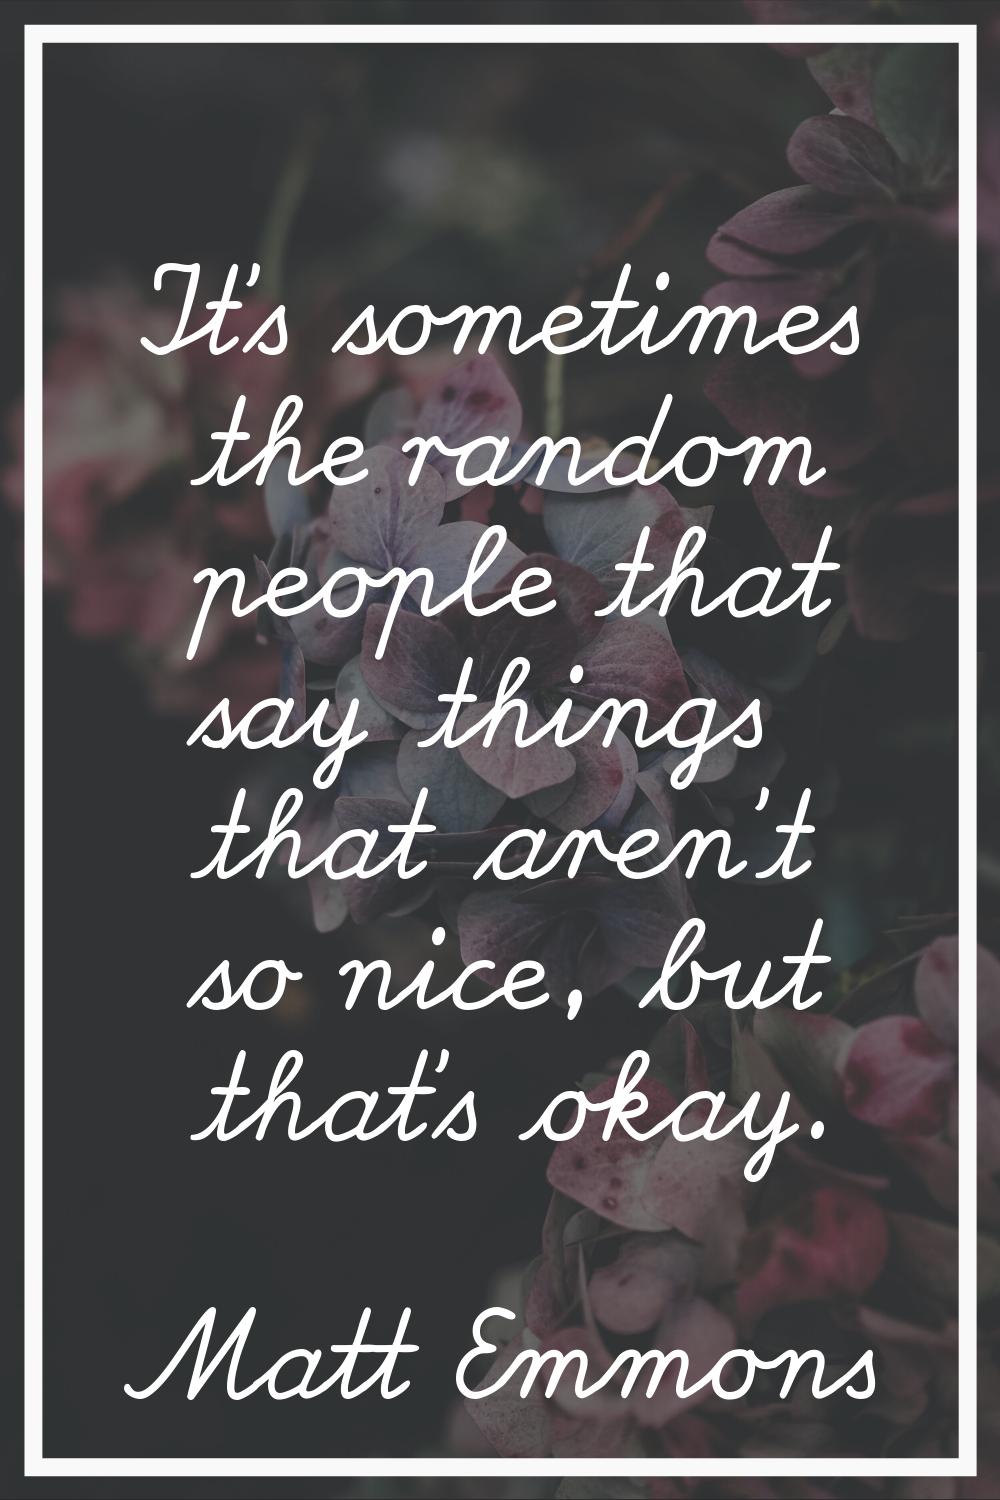 It's sometimes the random people that say things that aren't so nice, but that's okay.